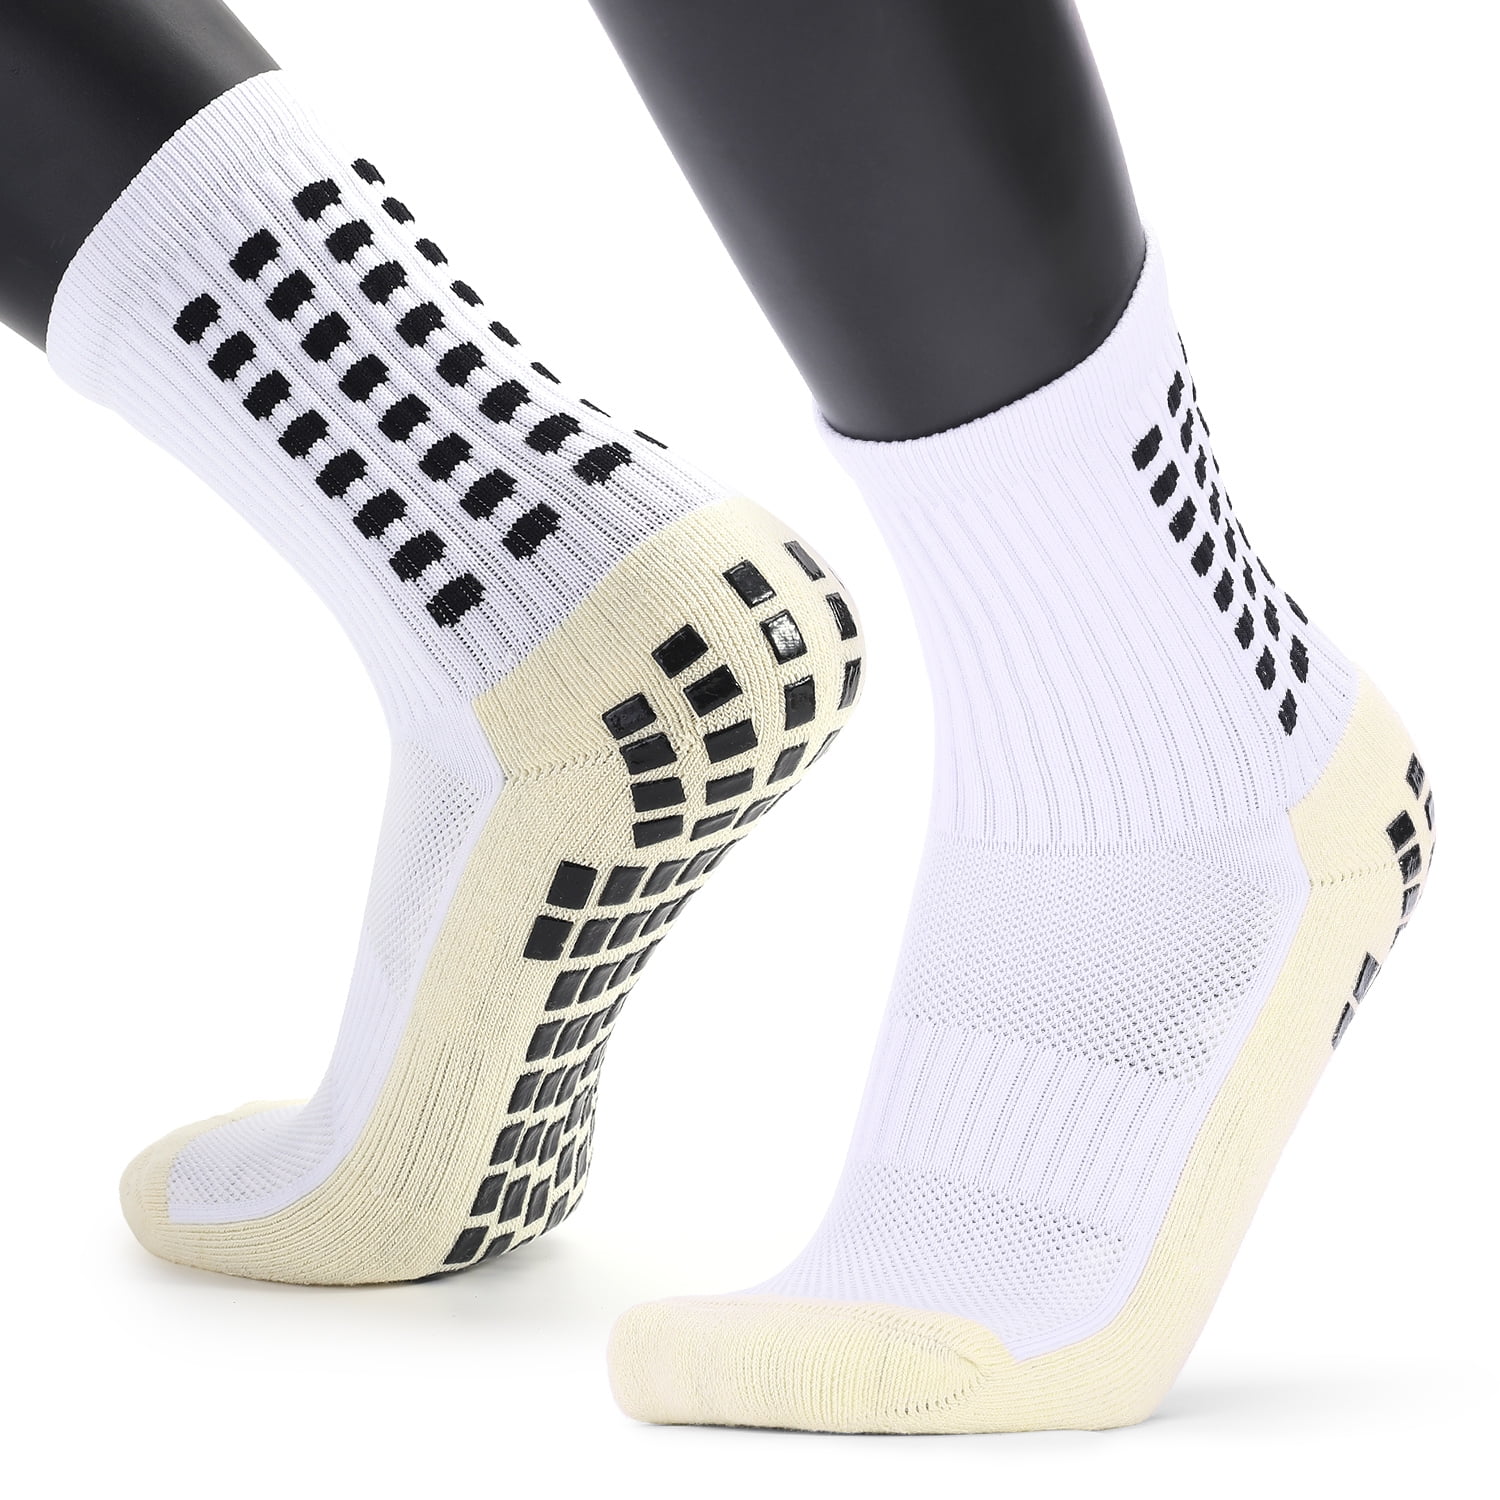 All Sports UNISEX 2 x PAIRS OF Anti Slip Football Socks With Outer Grip Pads 